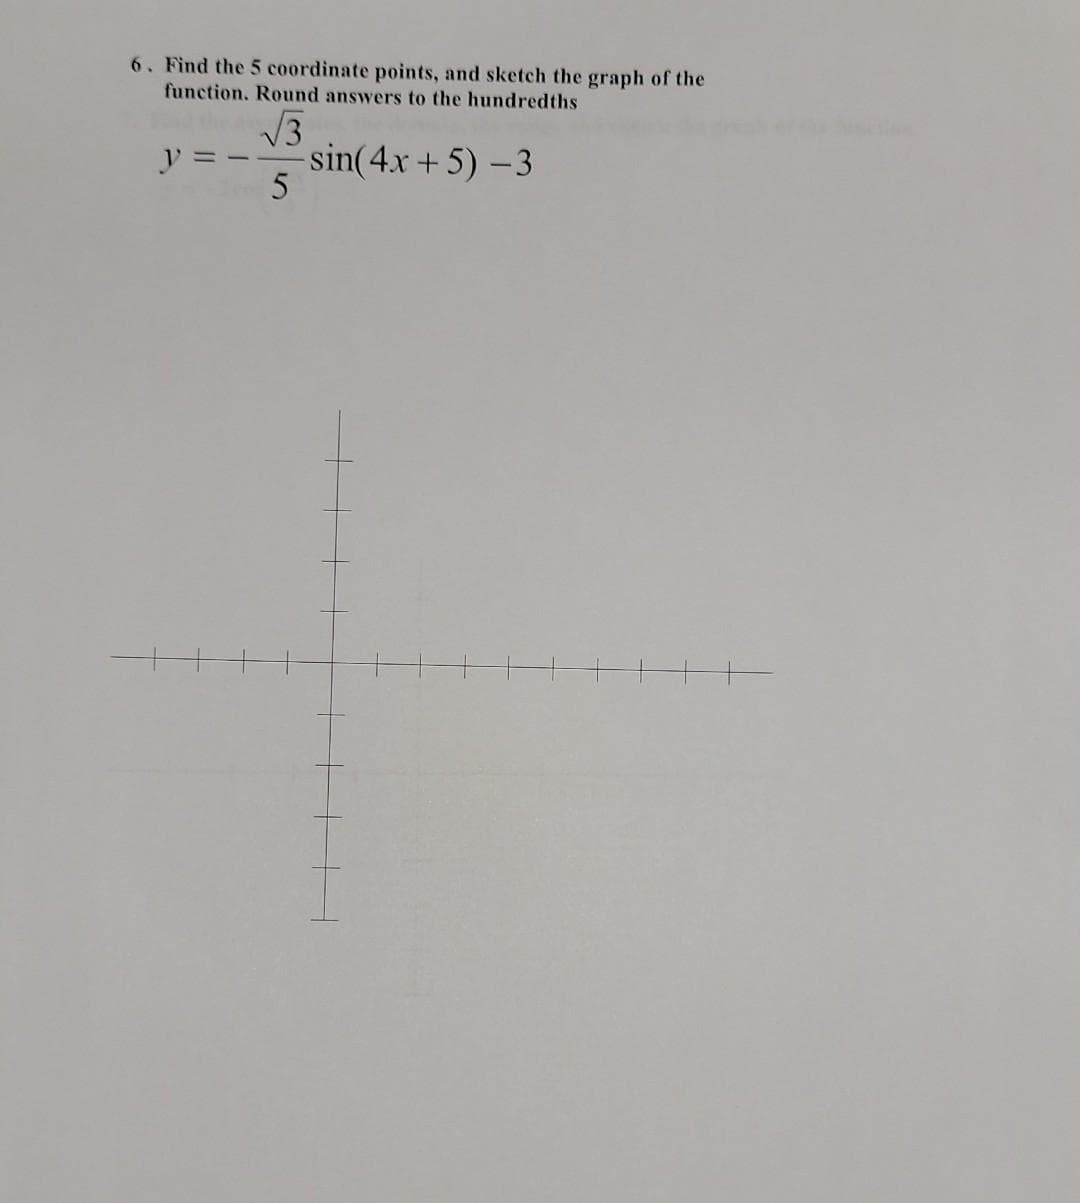 6. Find the 5 coordinate points, and sketch the graph of the
function. Round answers to the hundredths
V3
sin(4x + 5) -3
V = -
